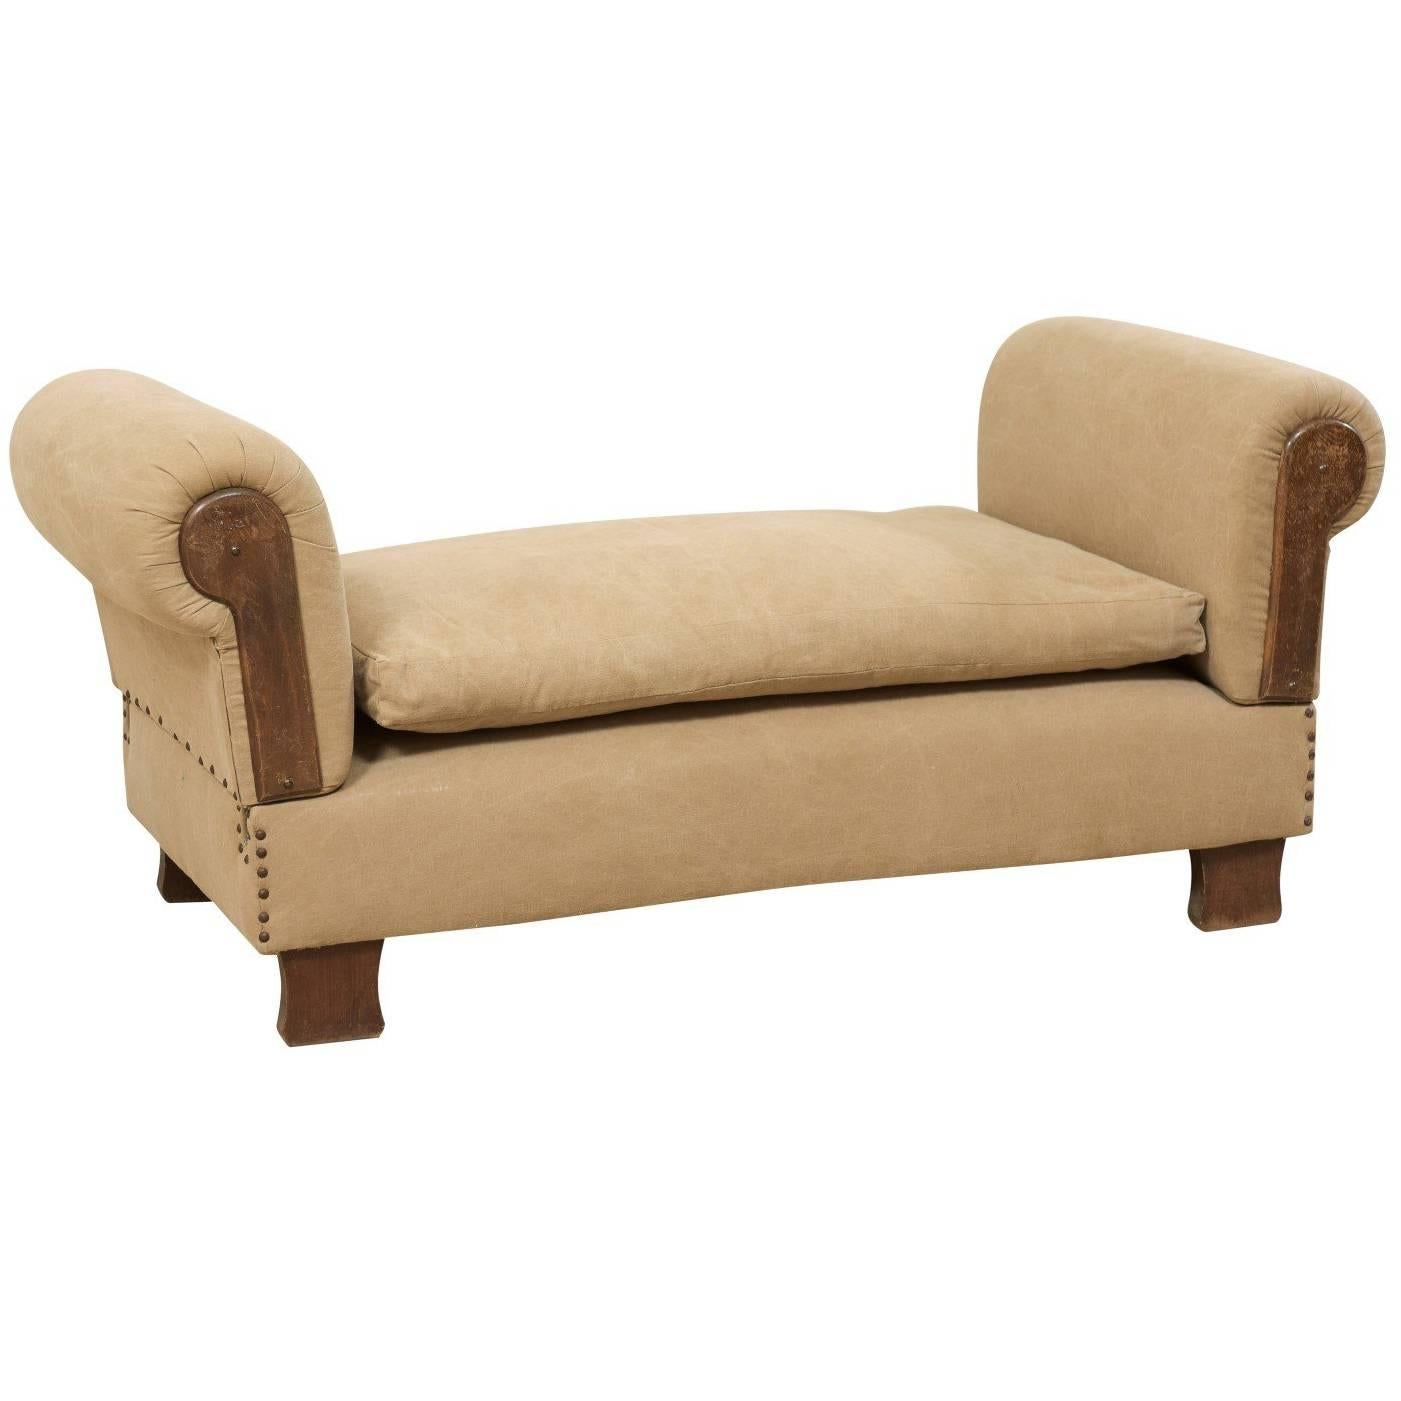 French Lit De Jour ‘Daybed’ circa 1920s-1930s with Nice Rounded Arms